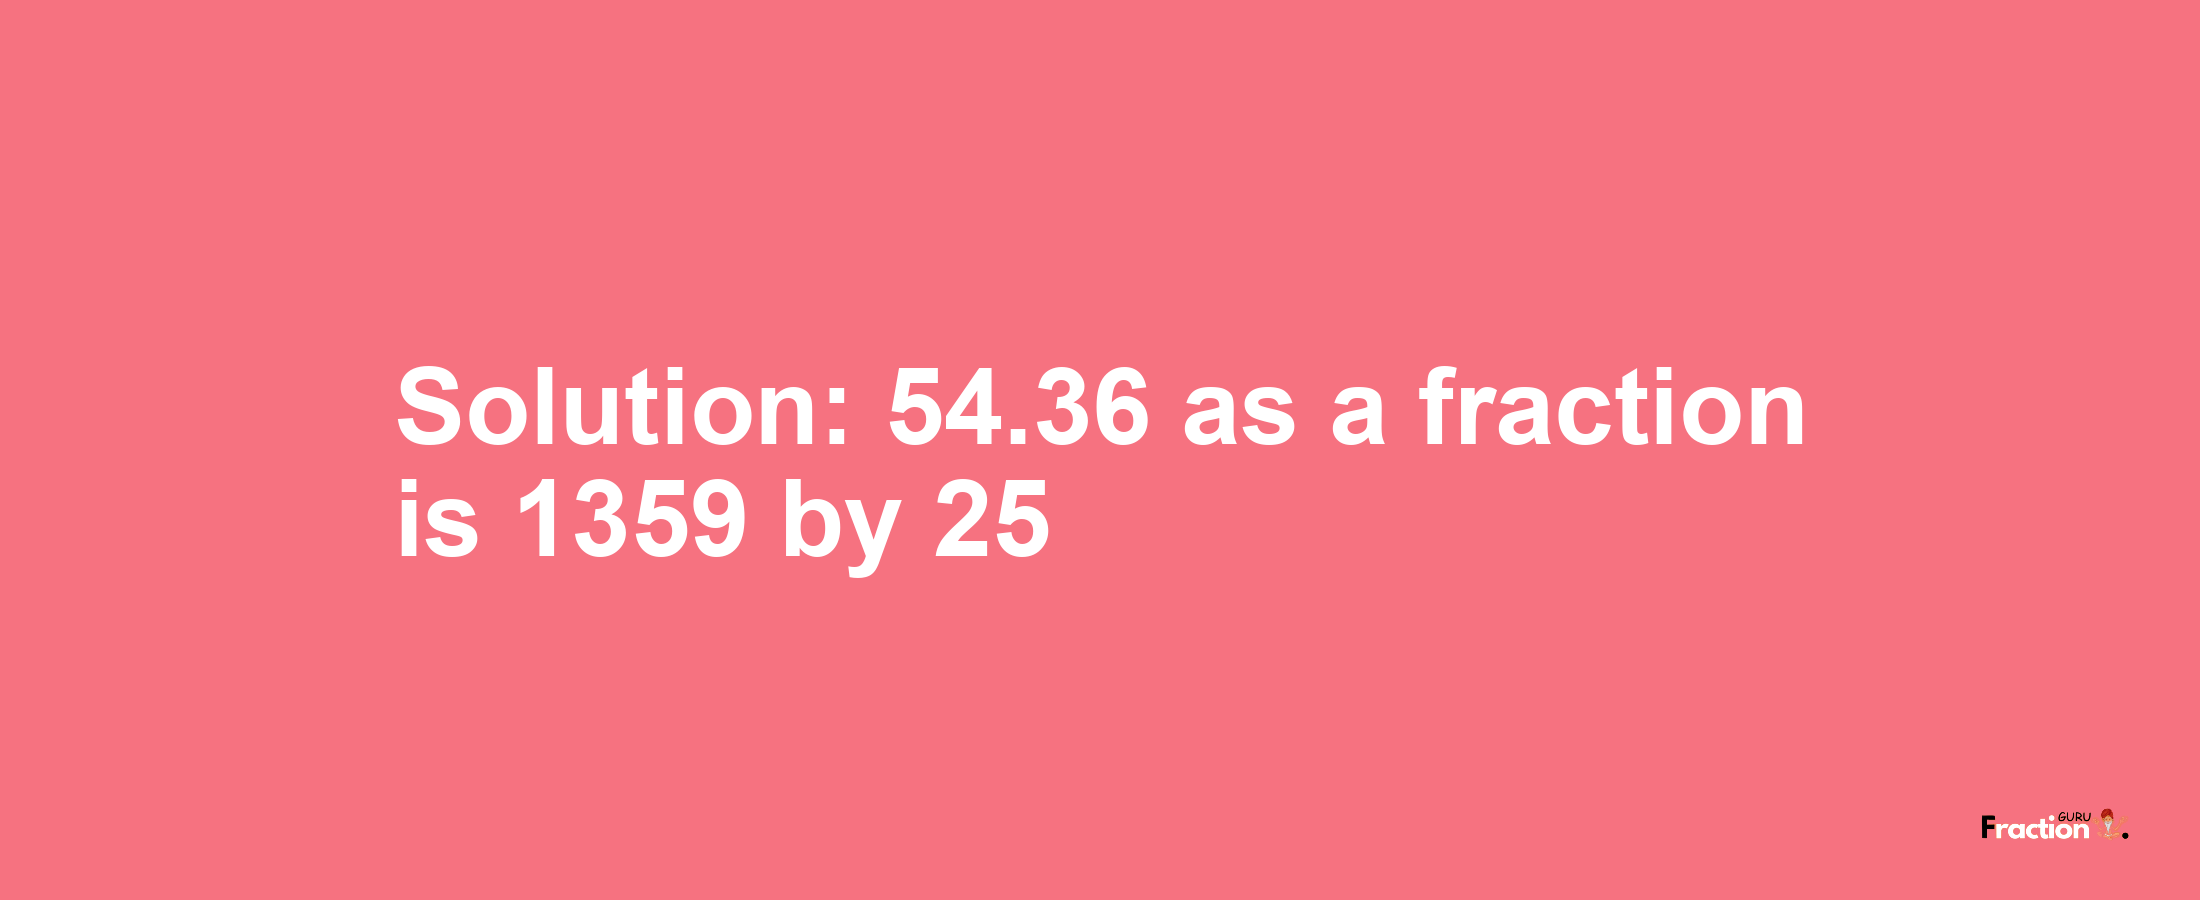 Solution:54.36 as a fraction is 1359/25